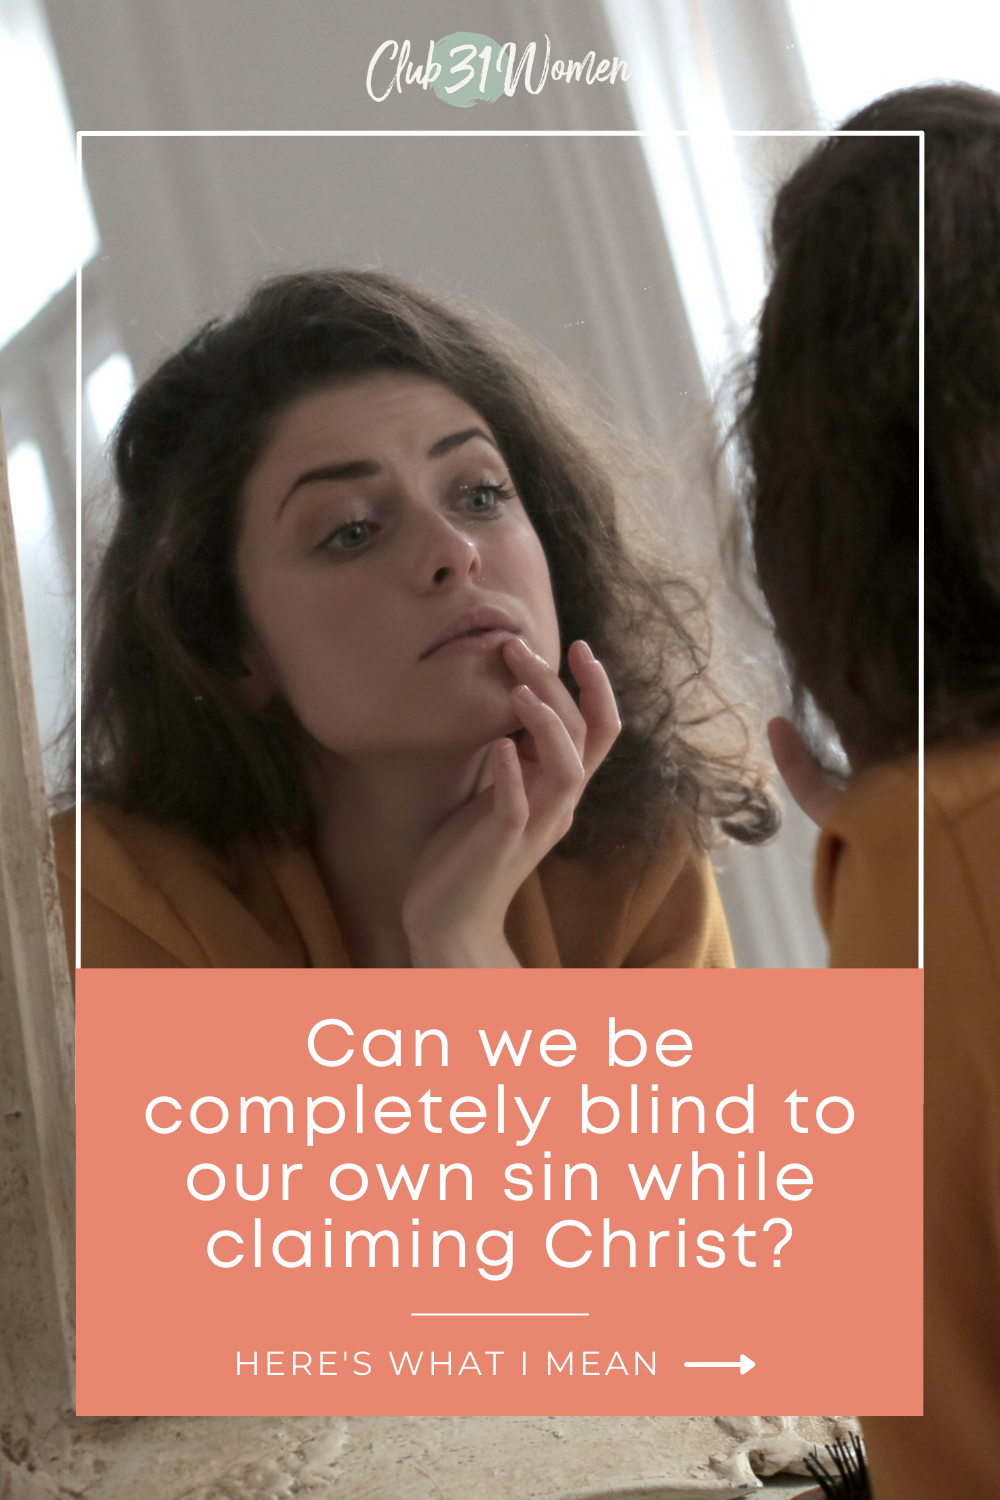 When we look in the mirror, are we being honest with ourselves about our own spiritual health? Are there blind spots we need to consider? via @Club31Women